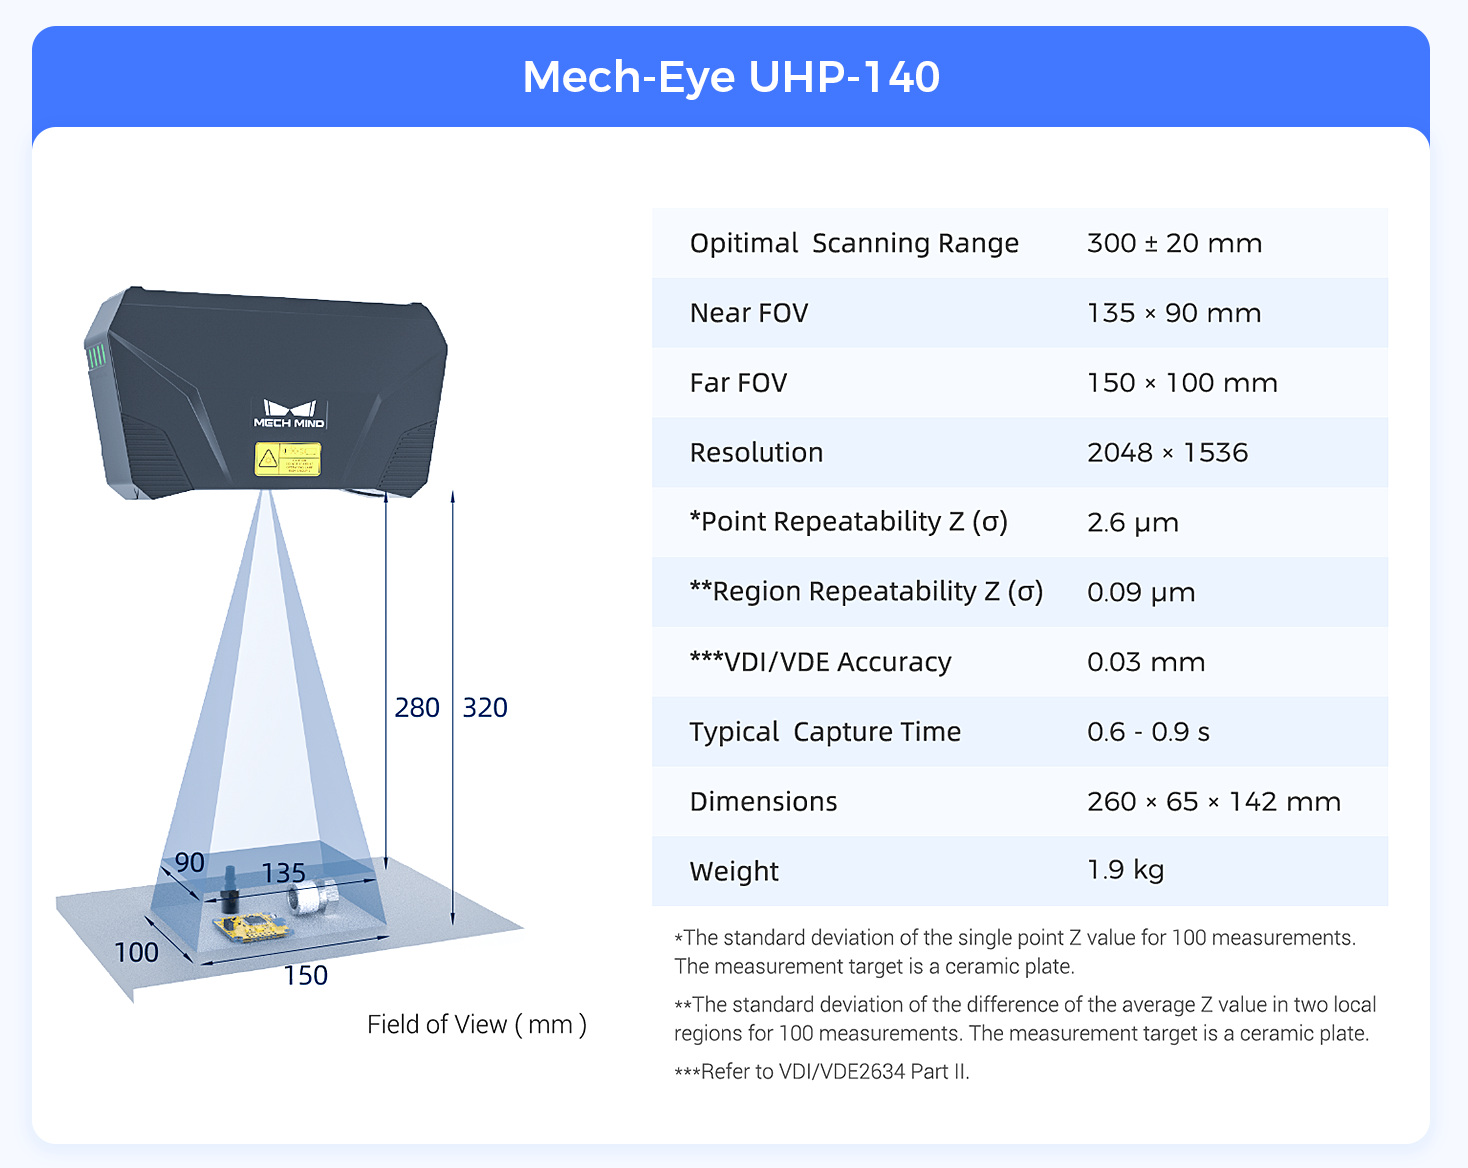  Release of Mech-Eye UHP-140 — the All-New 3D Camera with Micron-Level Accuracy for Inspection and Measurement in the Automotive Industry